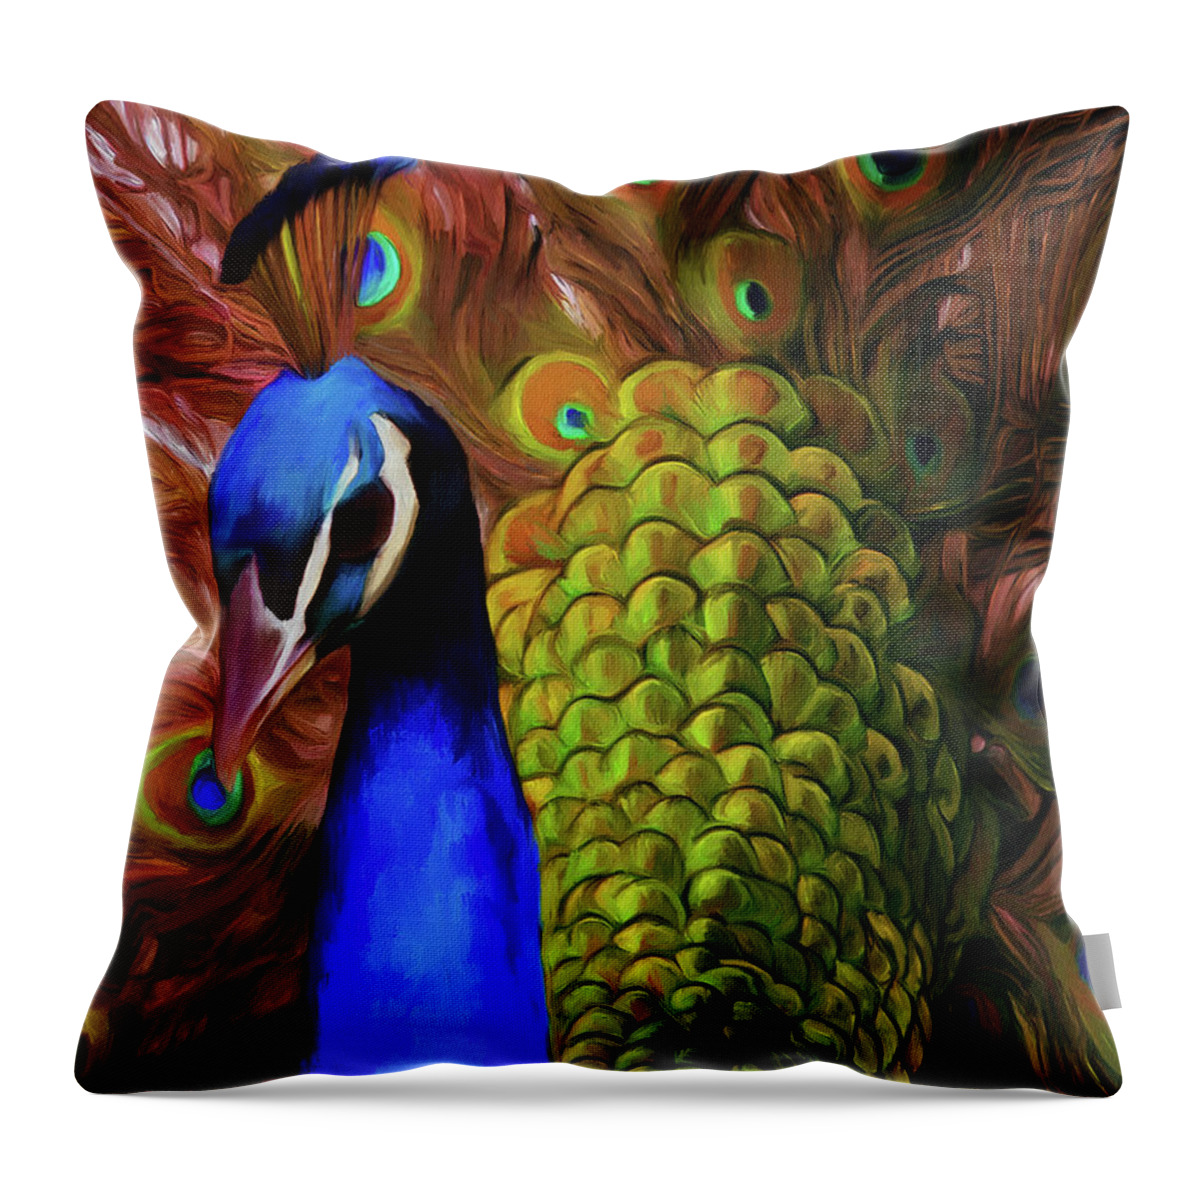 Peacock Feather Throw Pillow featuring the painting Peacock feathers by Gull G